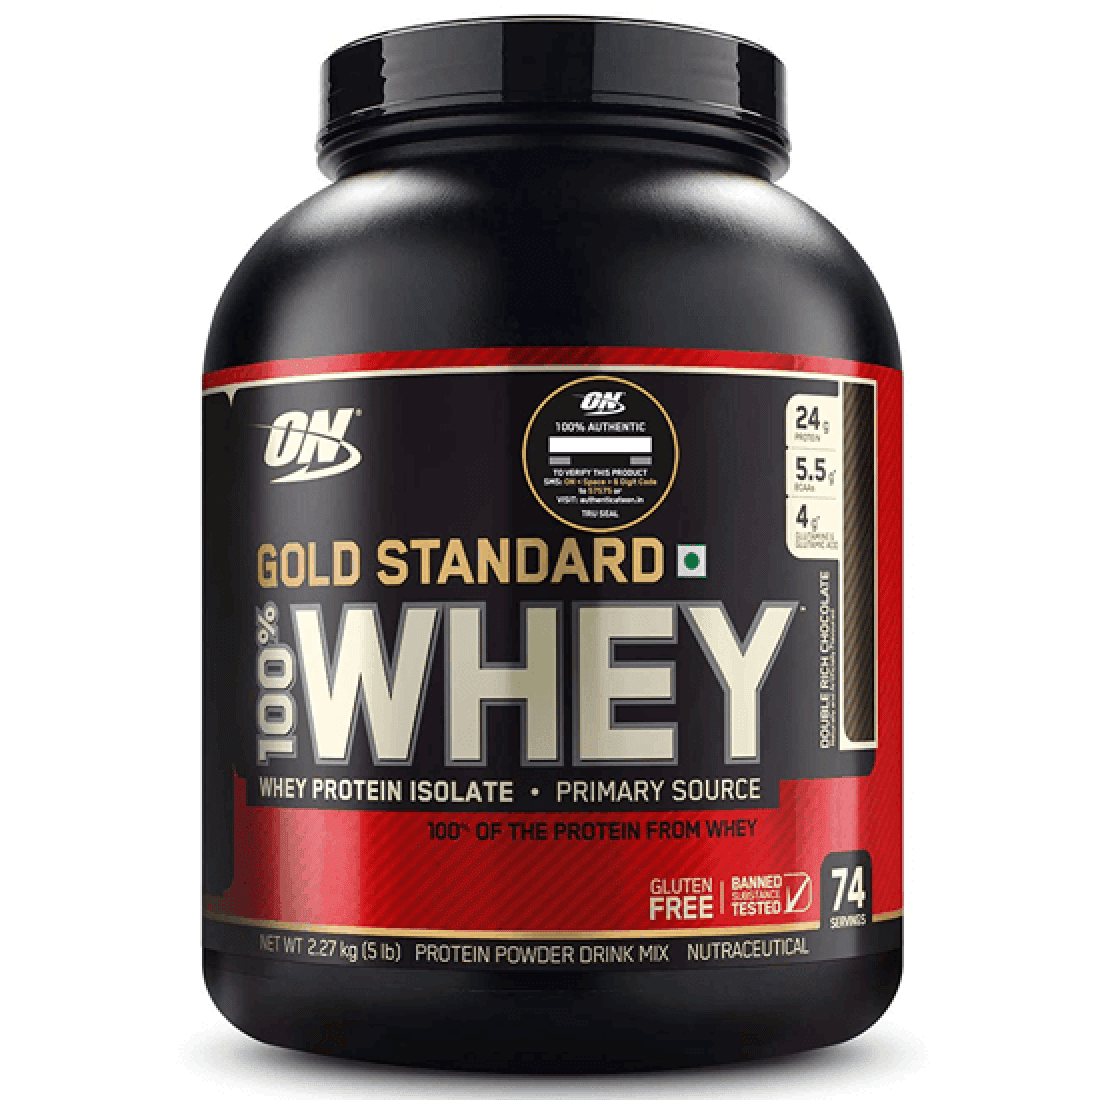 Gold Standard Whey Protein 5Lbs by Optimum Nutrition